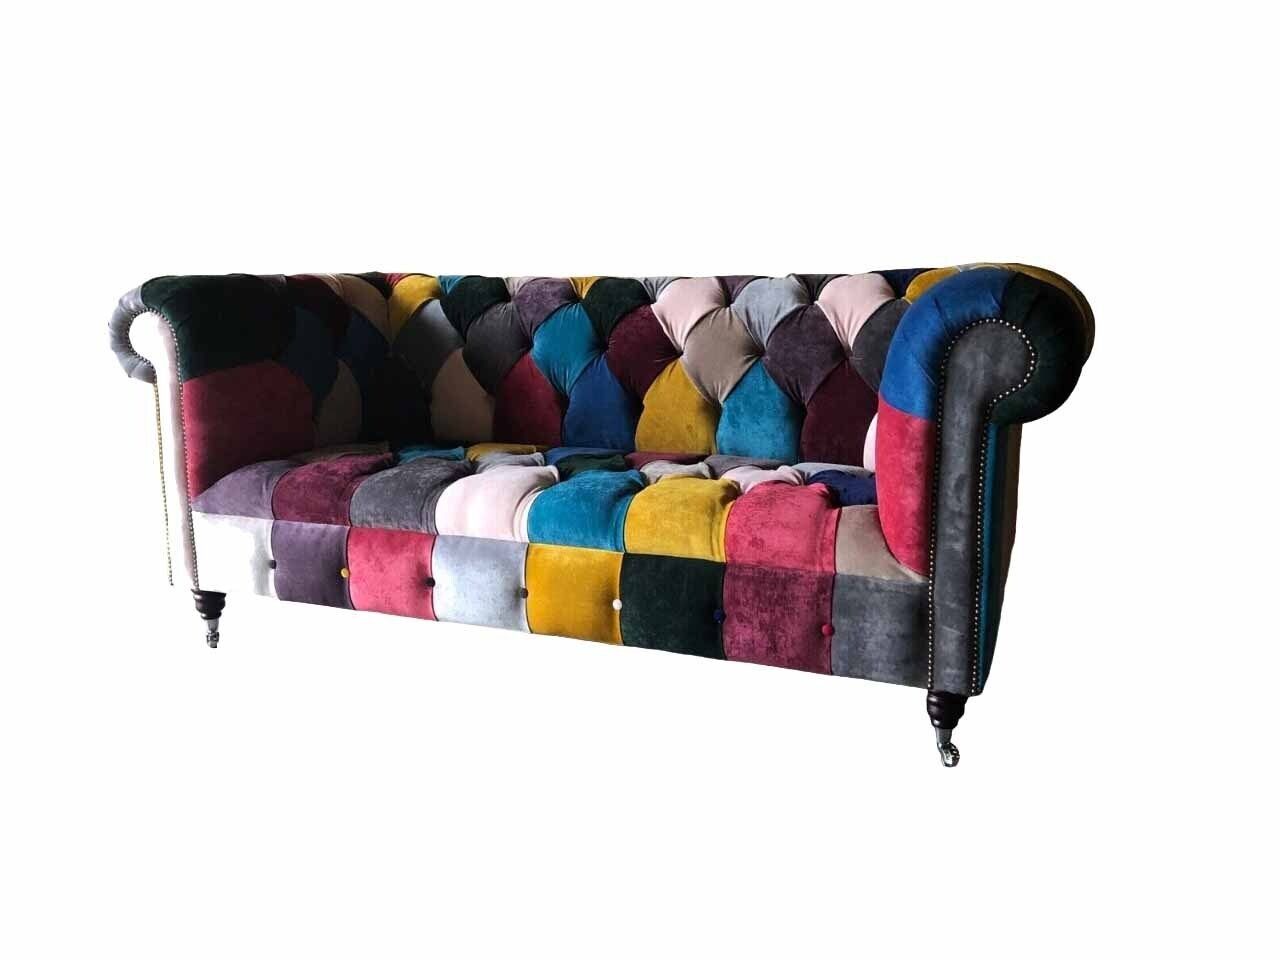 Europe Stoff, in 3 Made Bunter Polster Sofa Luxus Sofa JVmoebel Chesterfield Couch Sitzer Sofas